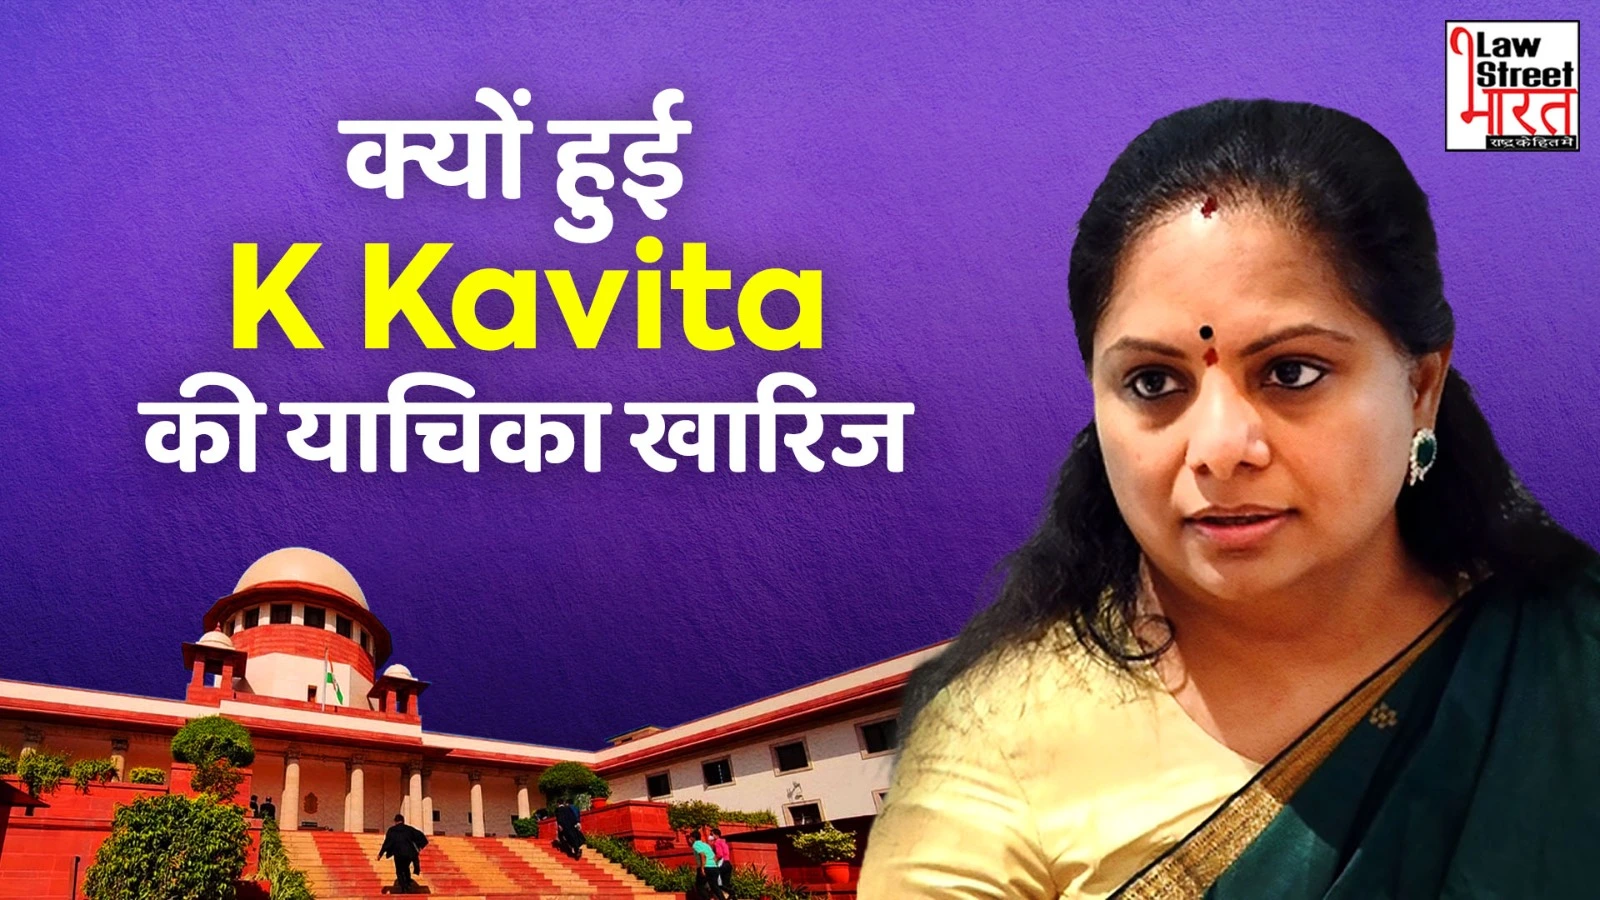 Delhi Liquor Policy Case: Why Court Rejected Kavitha's Bail Petition?